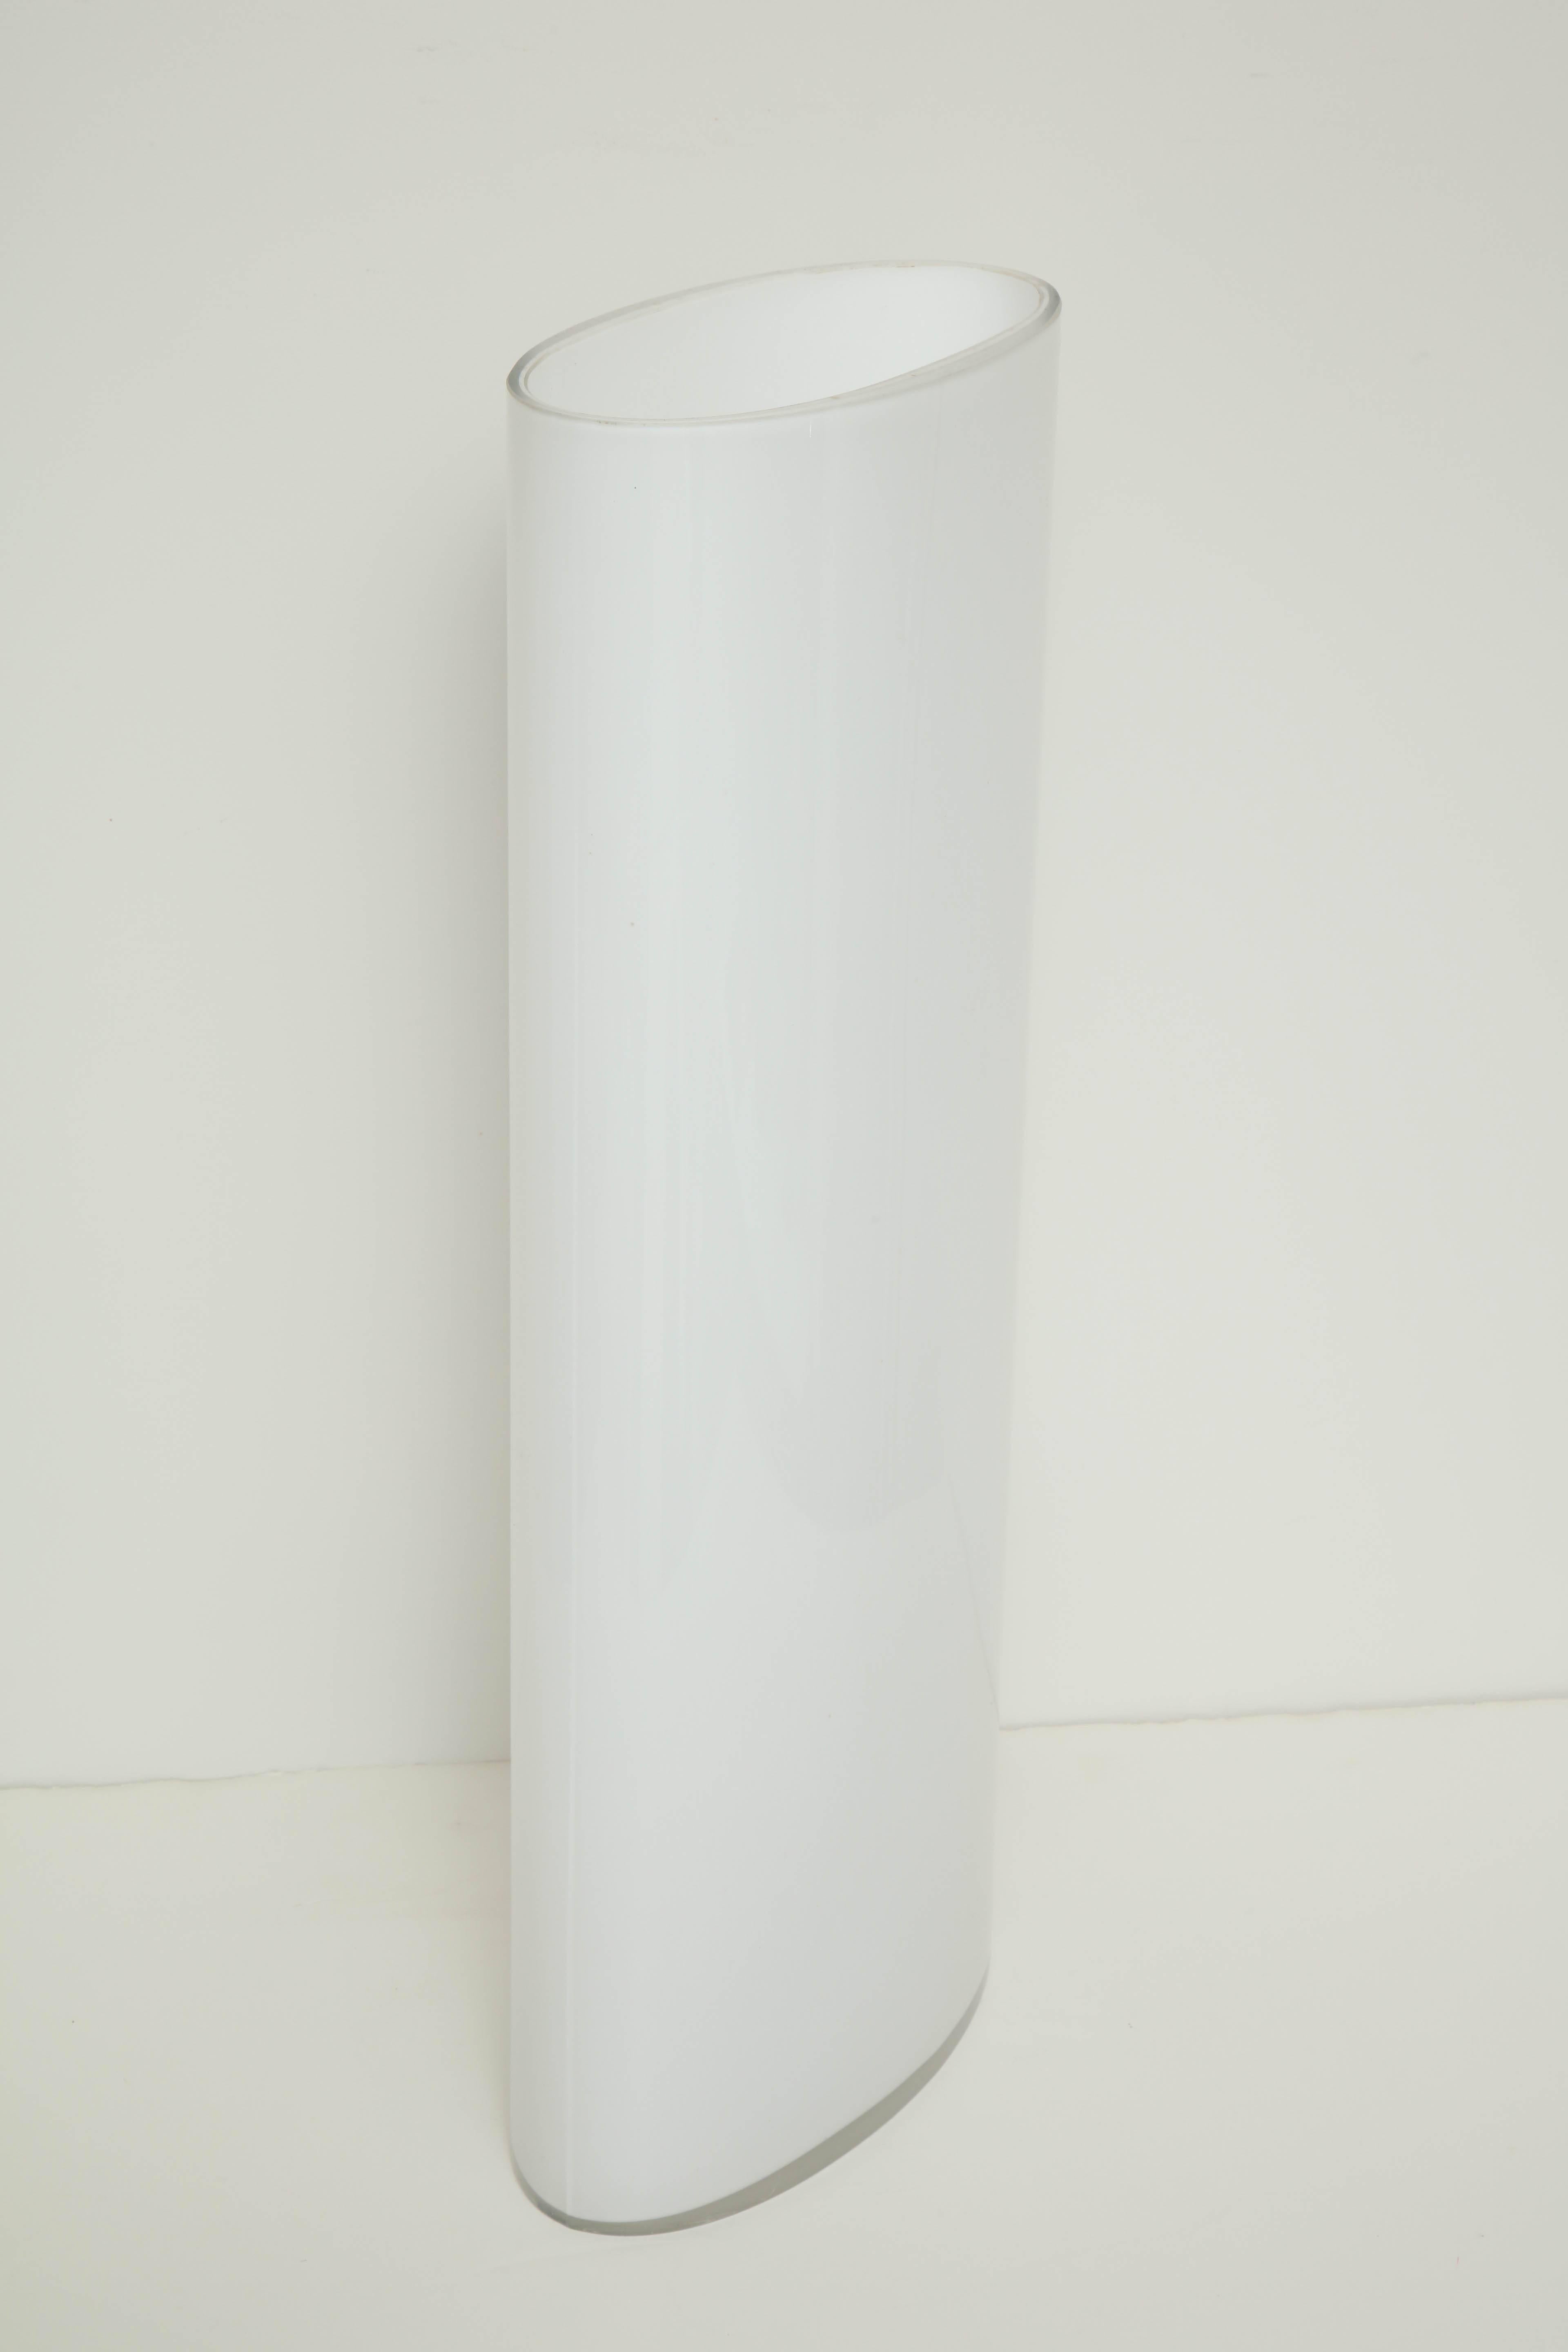 20th Century White Glass Narrow Oval Umbrella Stand For Sale